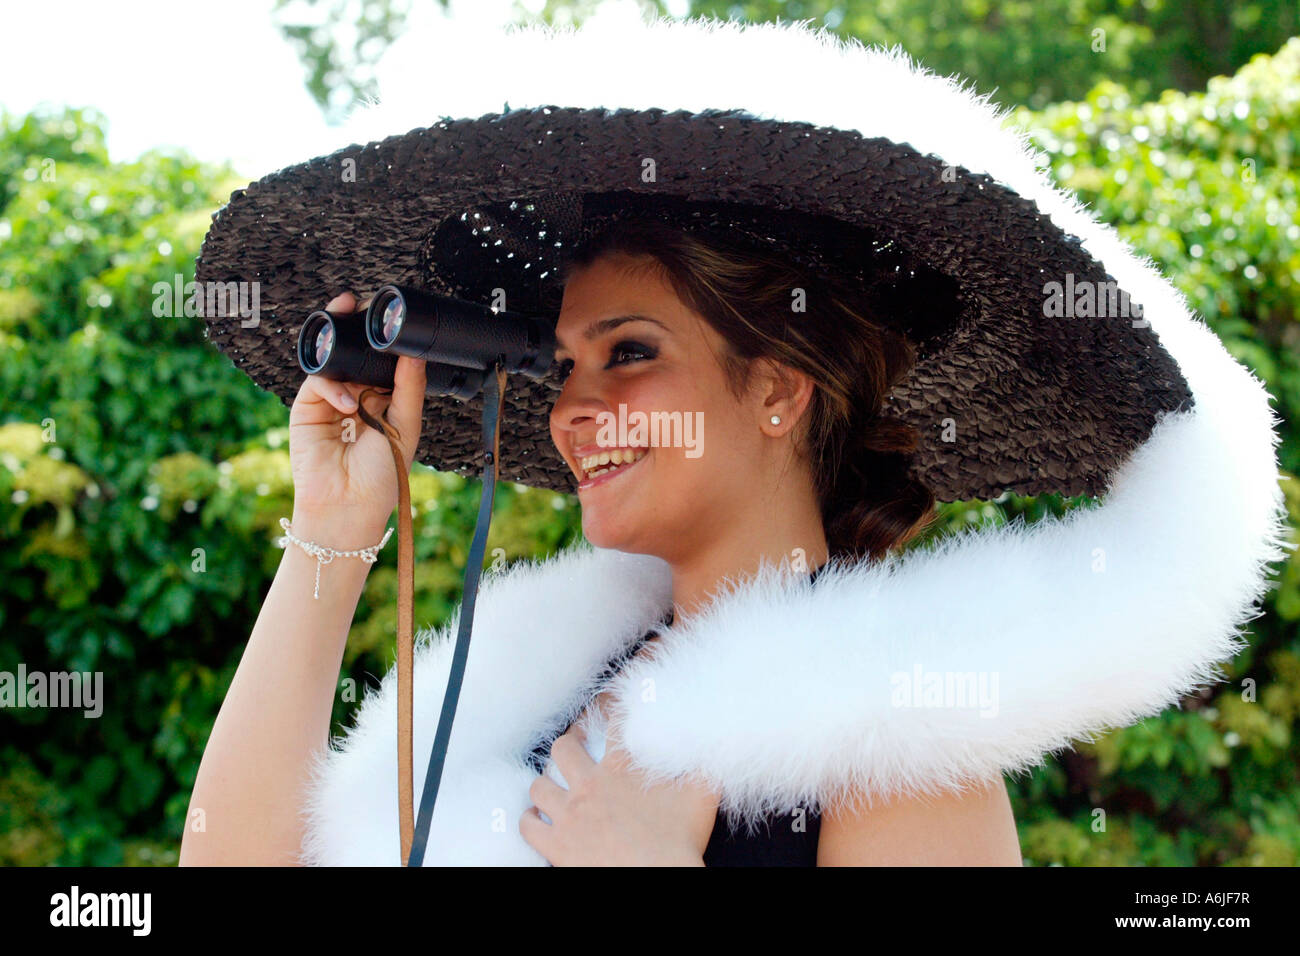 Woman in a fancy hat at horse races, Royal Ascot, Great Britain Stock Photo